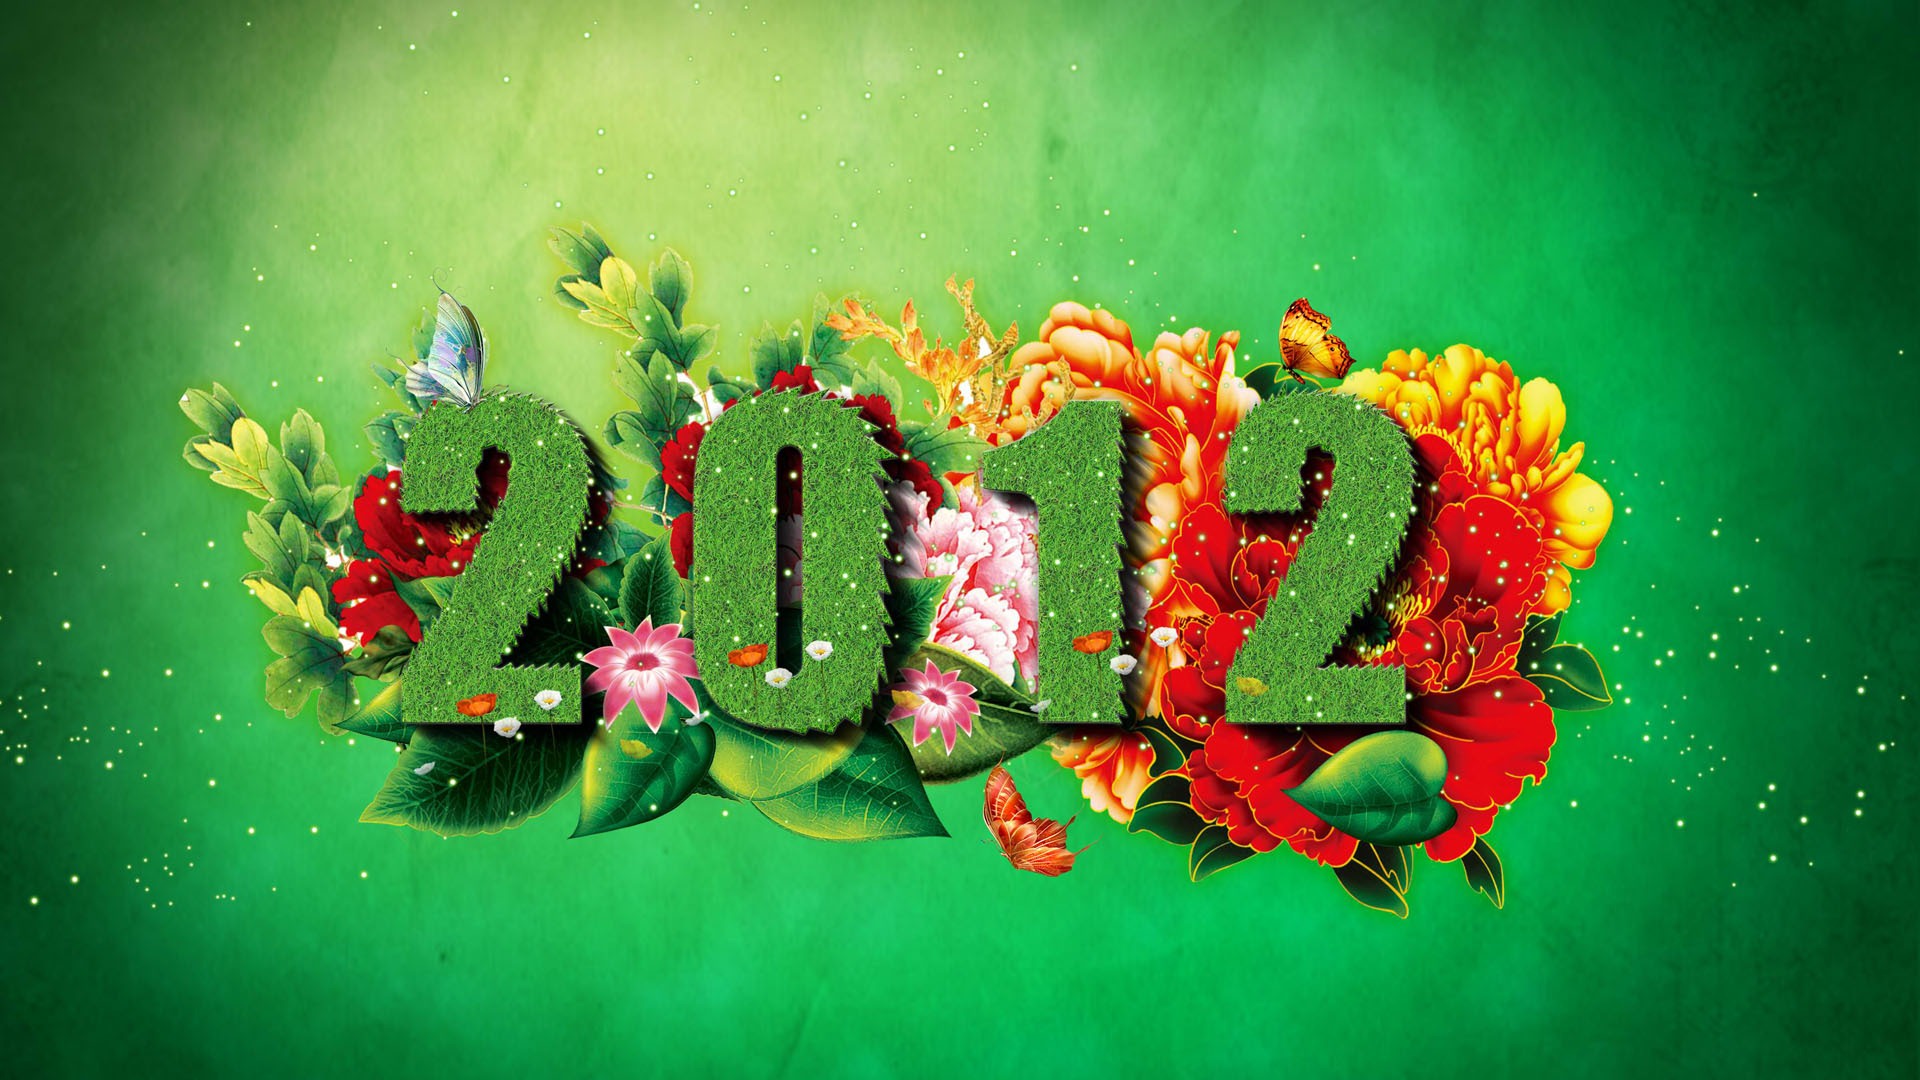 2012 New Year wallpapers (1) #19 - 1920x1080